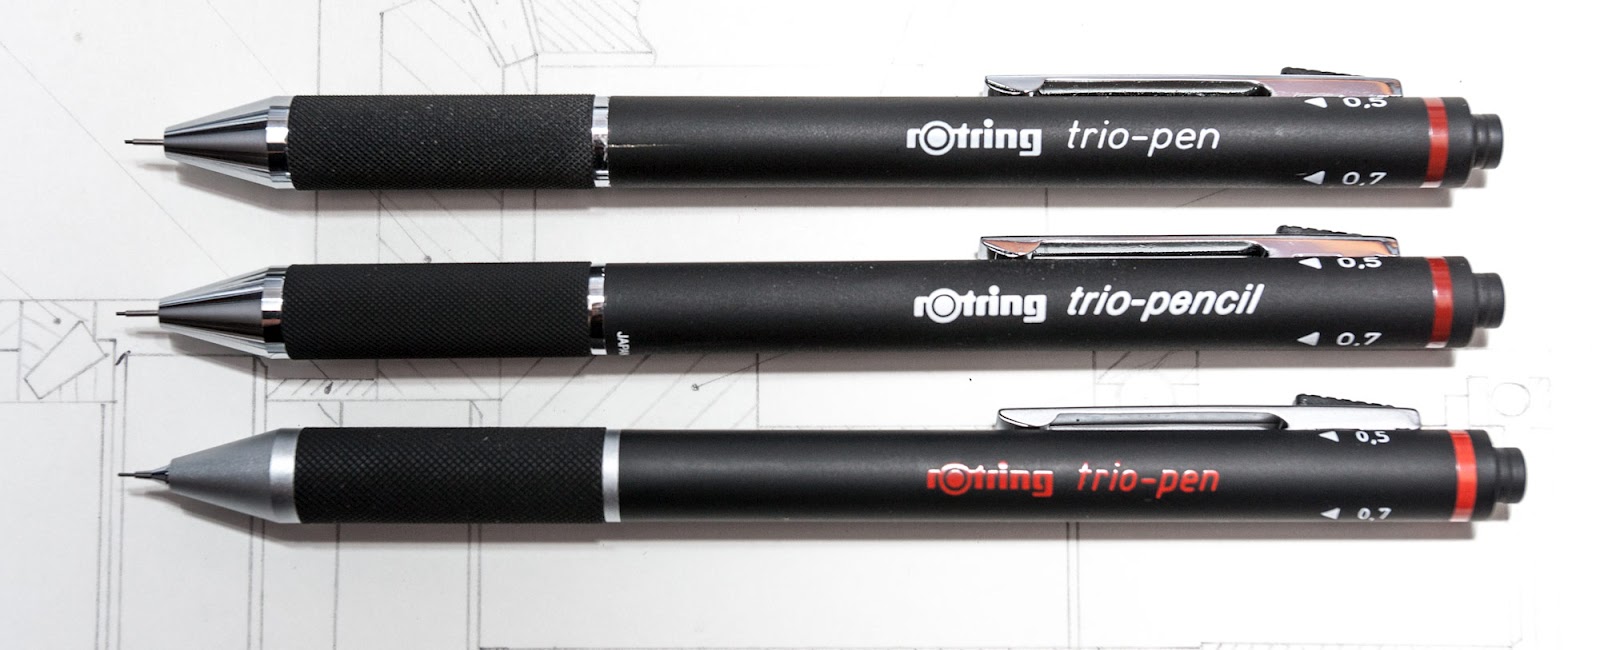 Drafting and Mechanical Pencils: rotring trio pencil - 502705